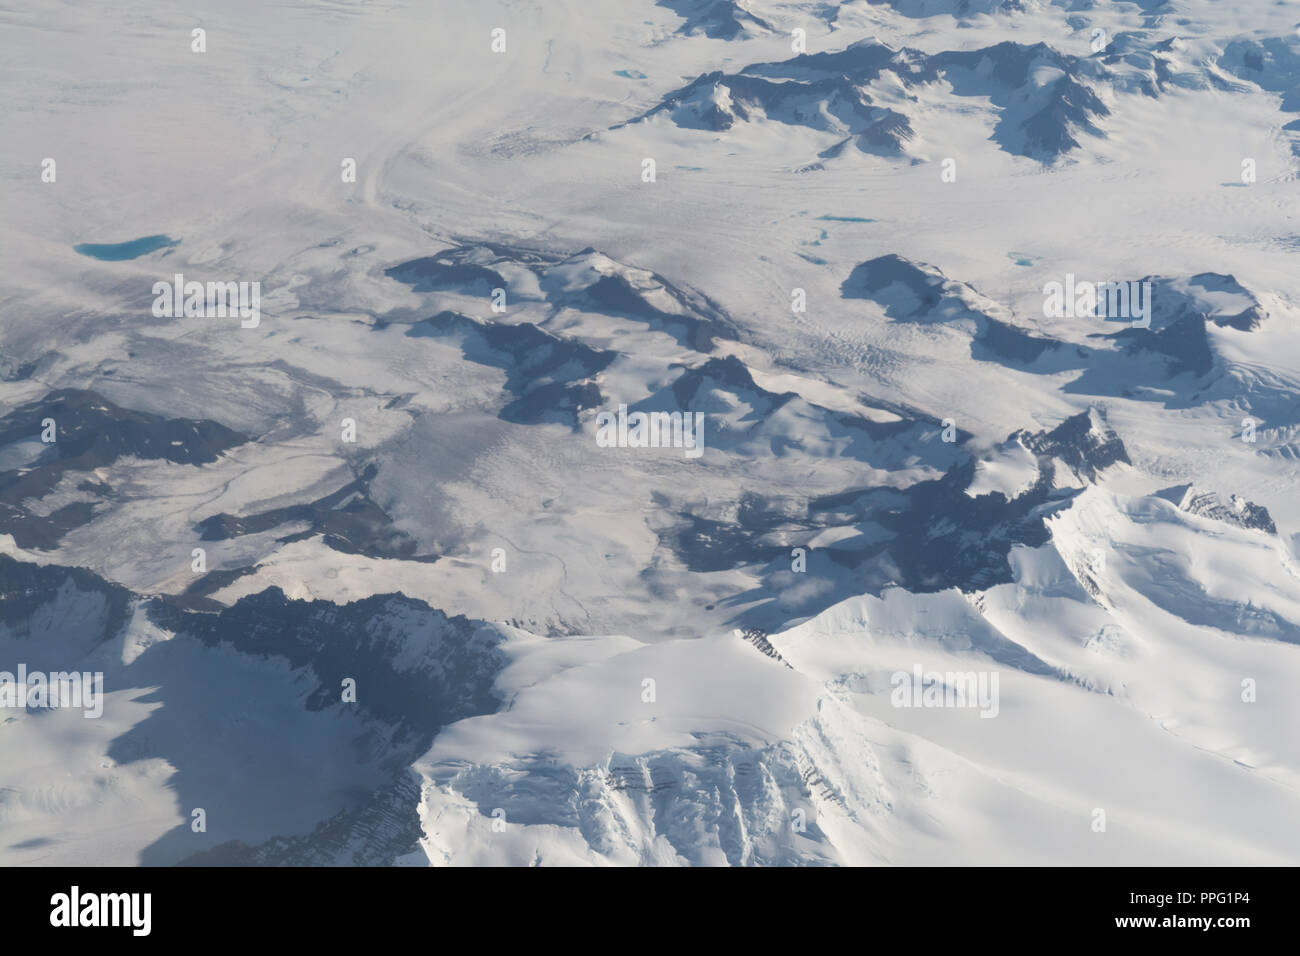 Ariel view of a snow covered mountain range Stock Photo